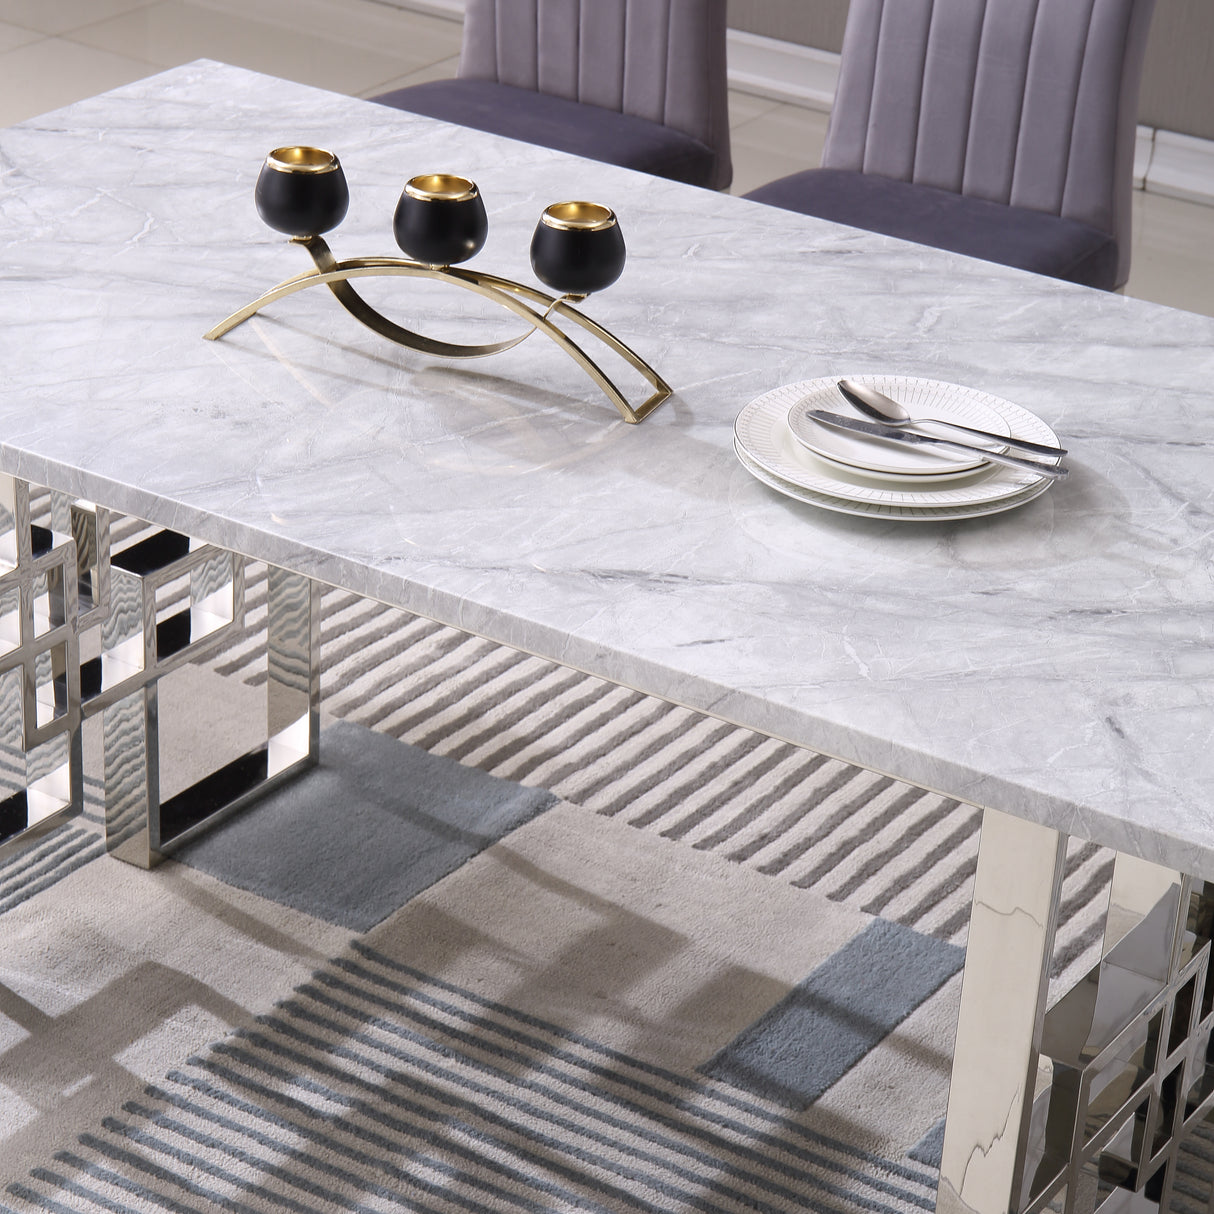 Contemporary Rectangular Marble Table, 0.71" Marble Top, Silver Mirrored Finish, Luxury Design For Home (63"x35.4"x29.5") - Home Elegance USA